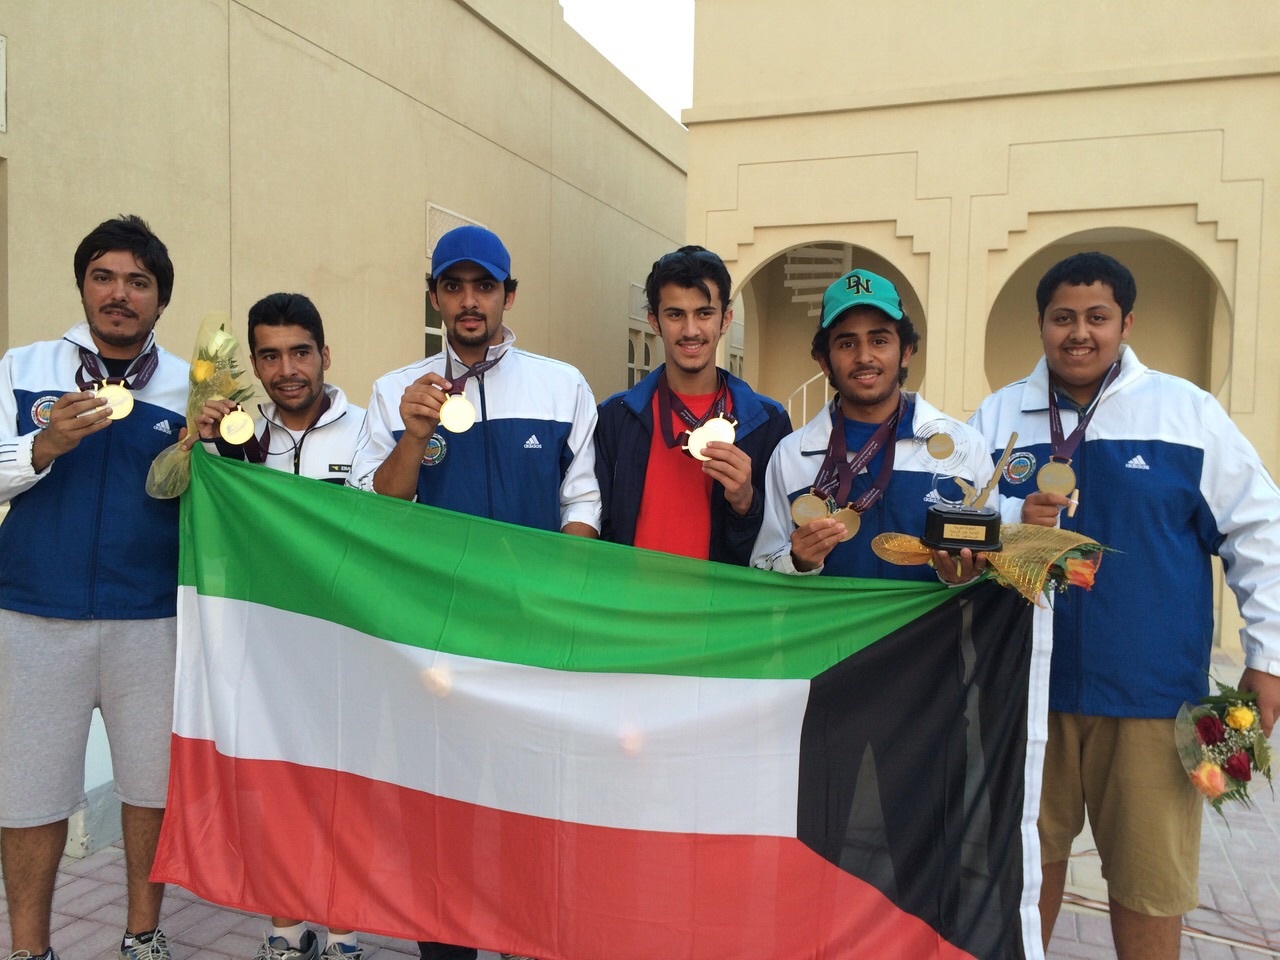 Kuwaitis 2nd best Arab shooters with 35 medals